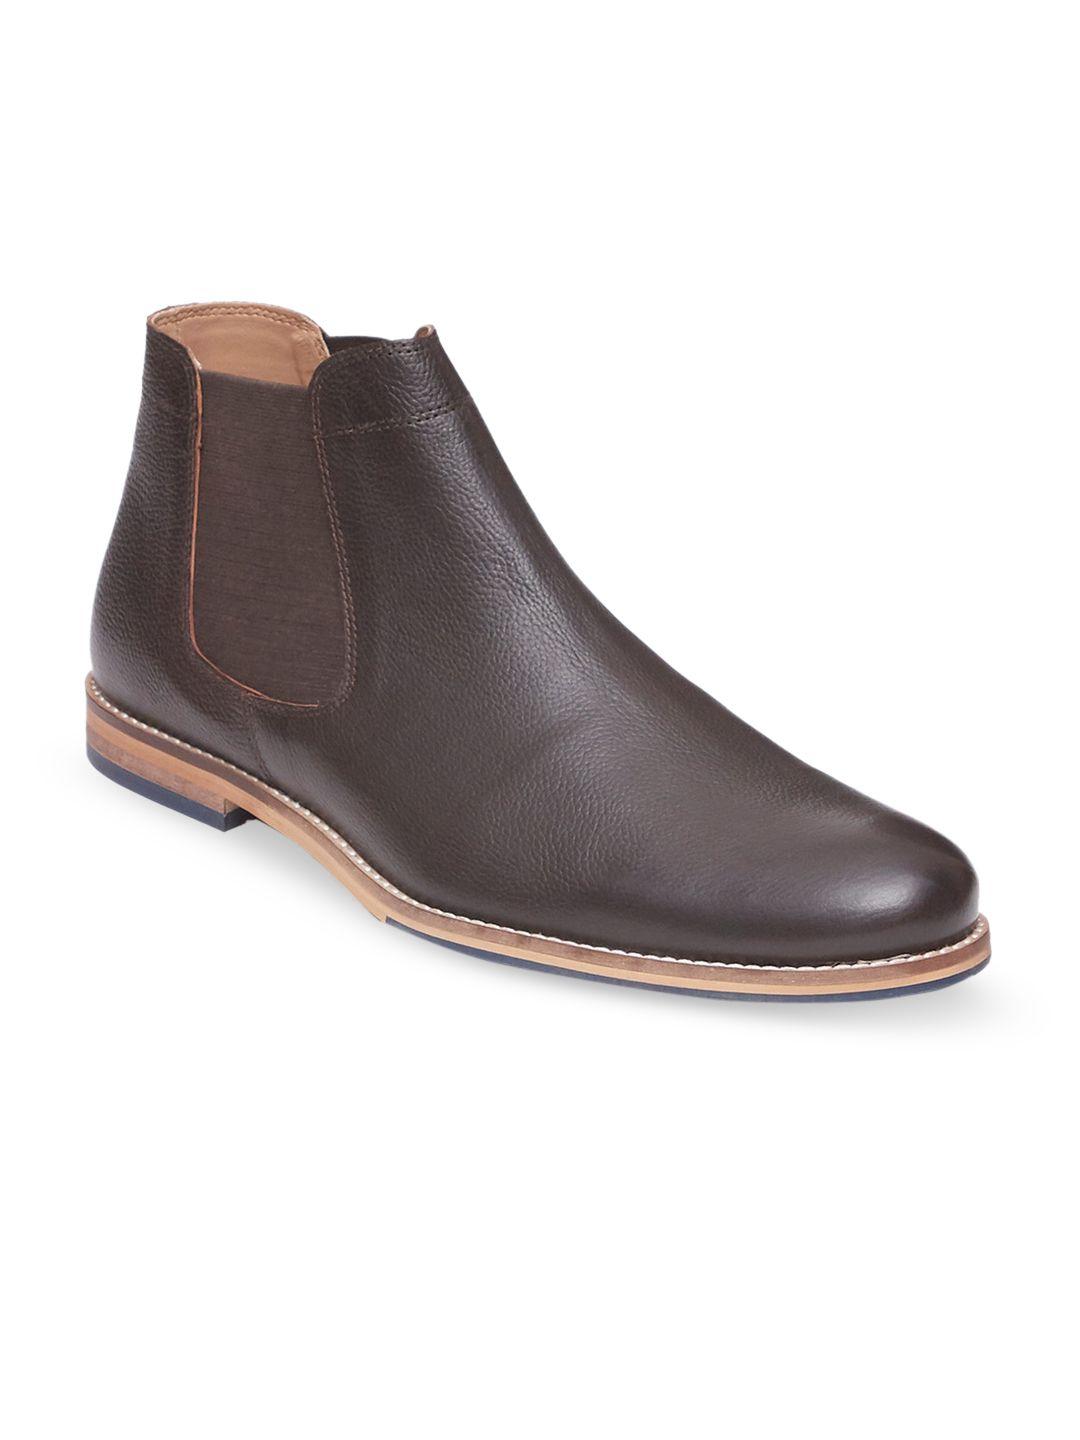 hats off accessories men brown leather flat boots